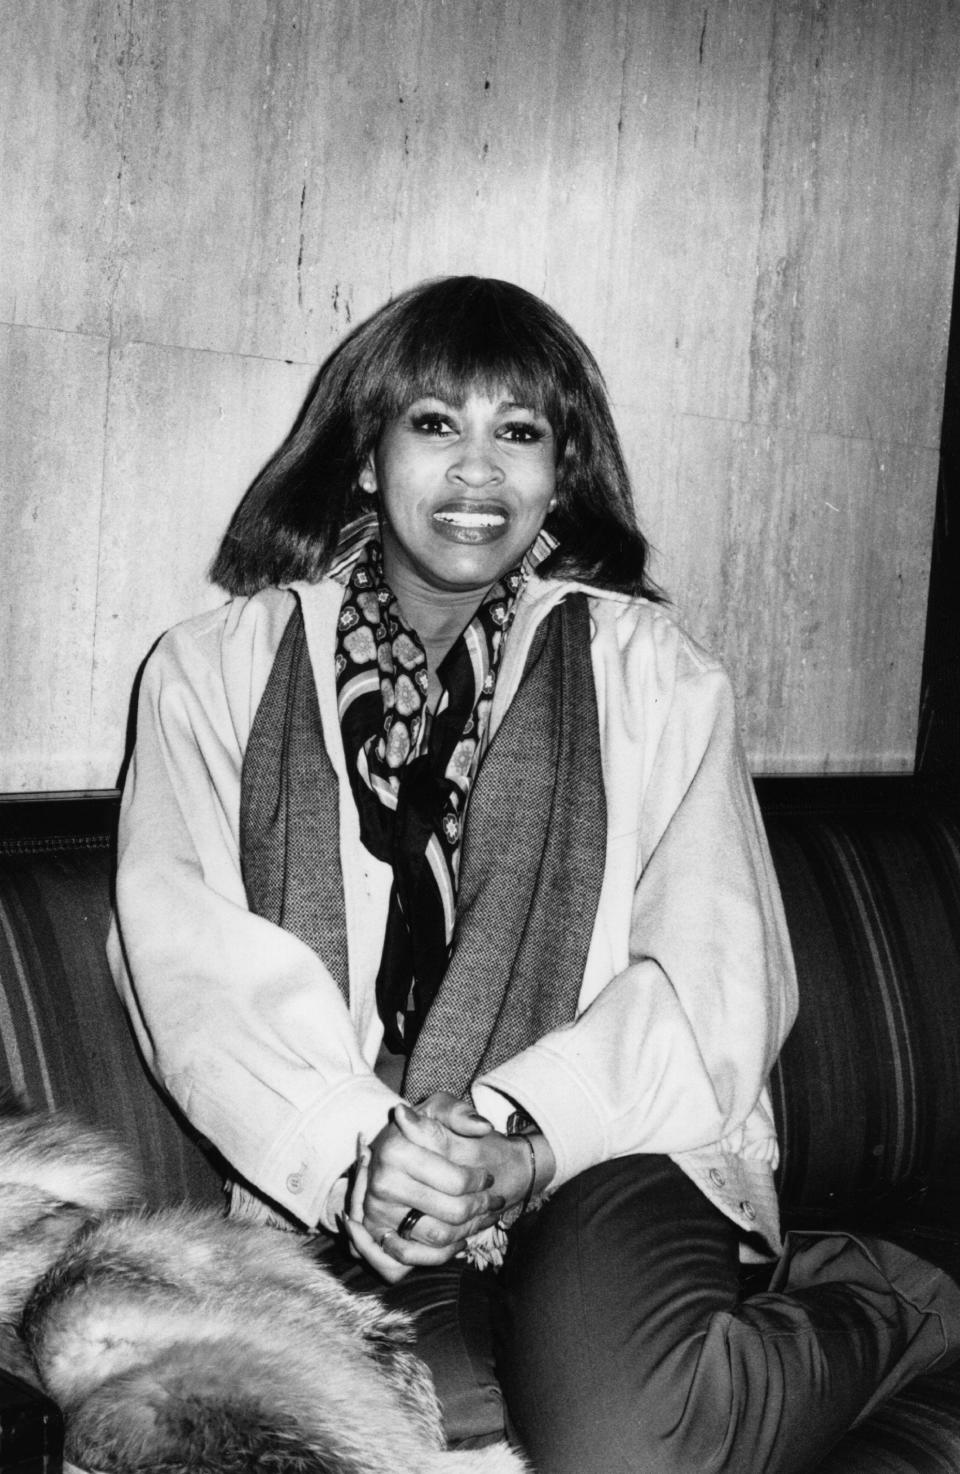 Tina Turner in 1978, the year she said she was first diagnosed with hypertension.